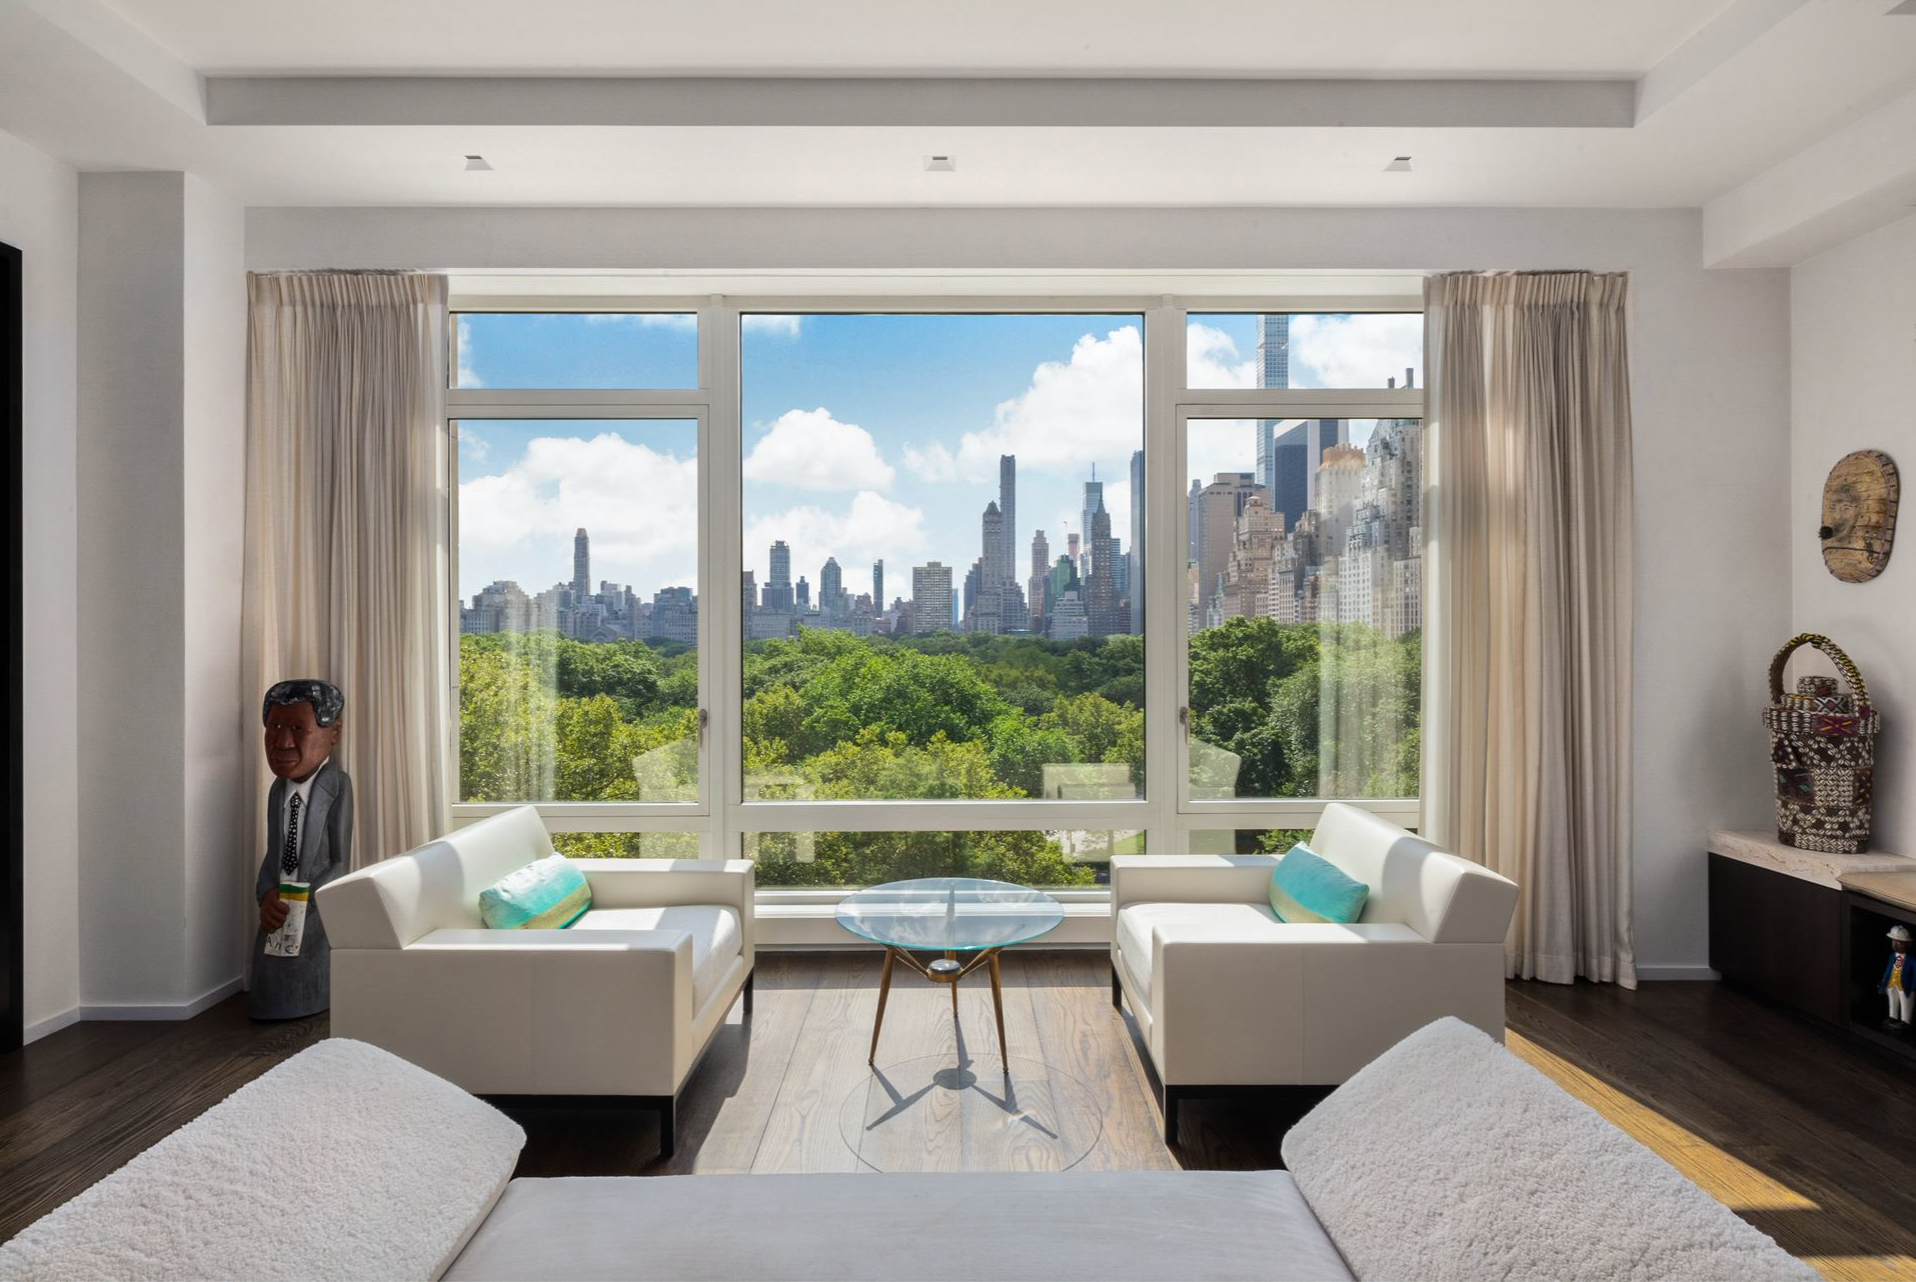 Main living area in the Jeffrey Beers-renovated apartment at 15 Central Park West, with gorgeous views of NYC visible just beyond the large windows.